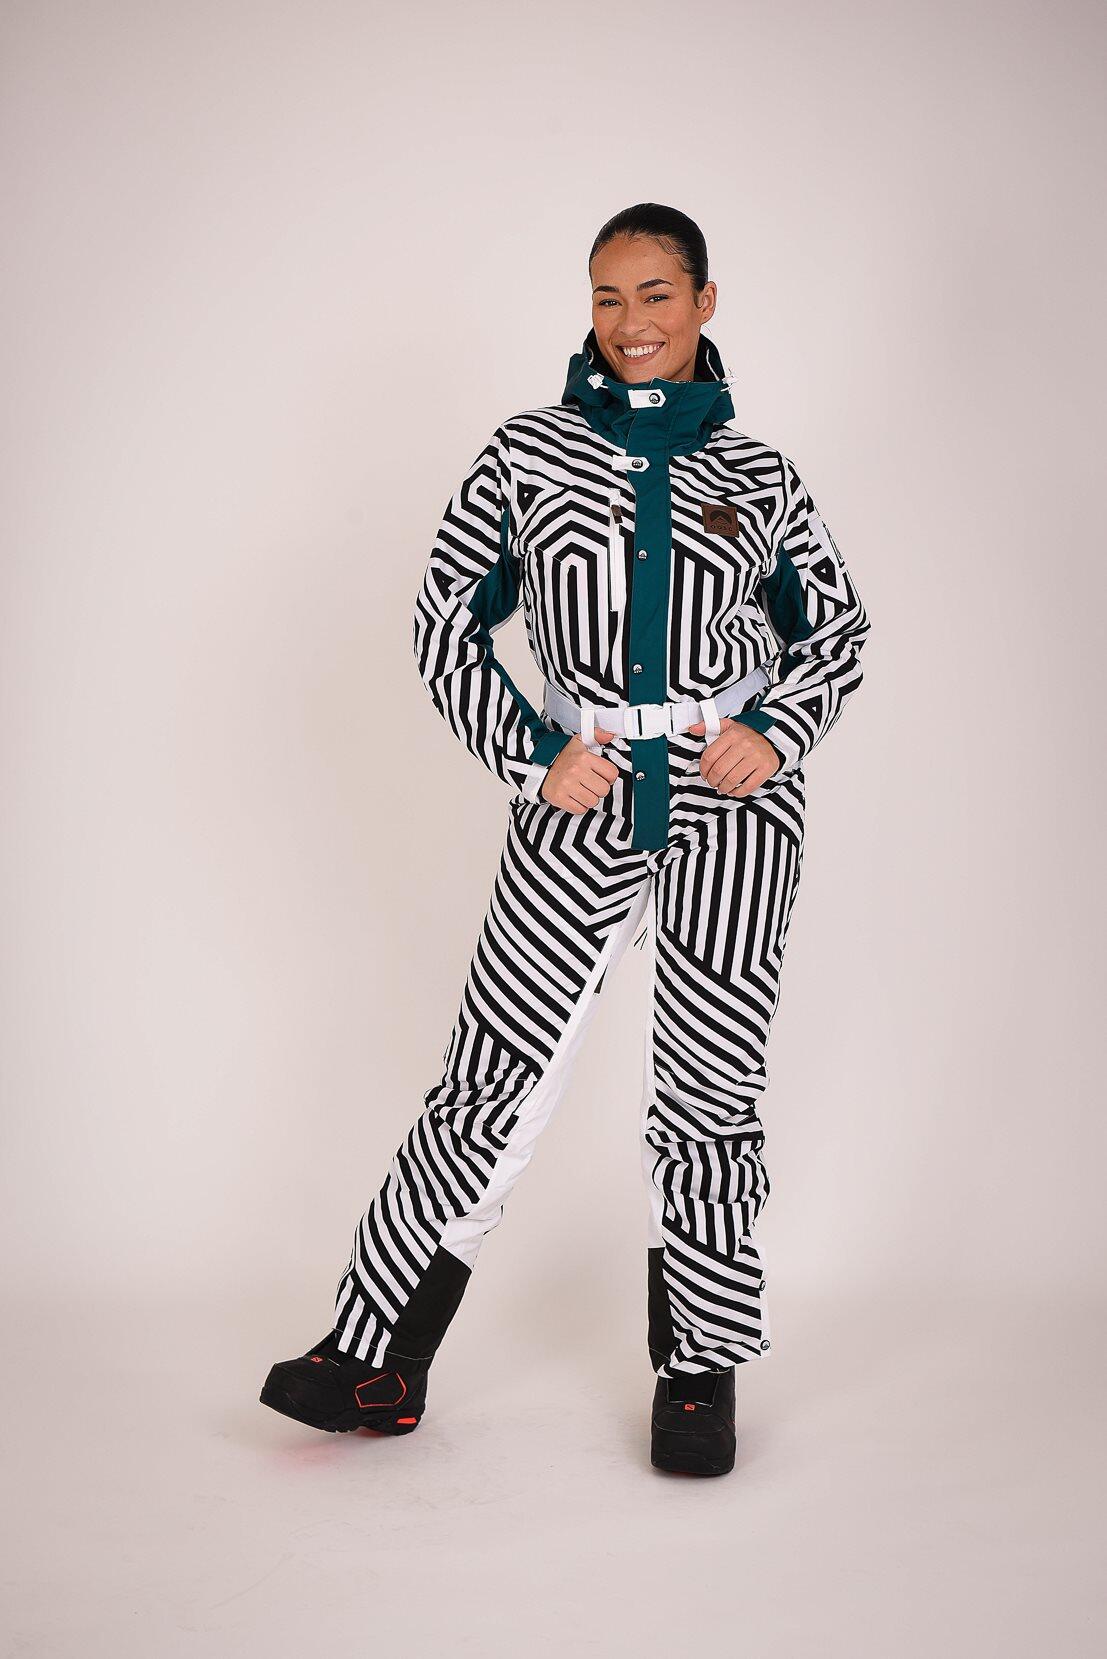 OOSC Fall Line Black & White Curved Female Ski Suit